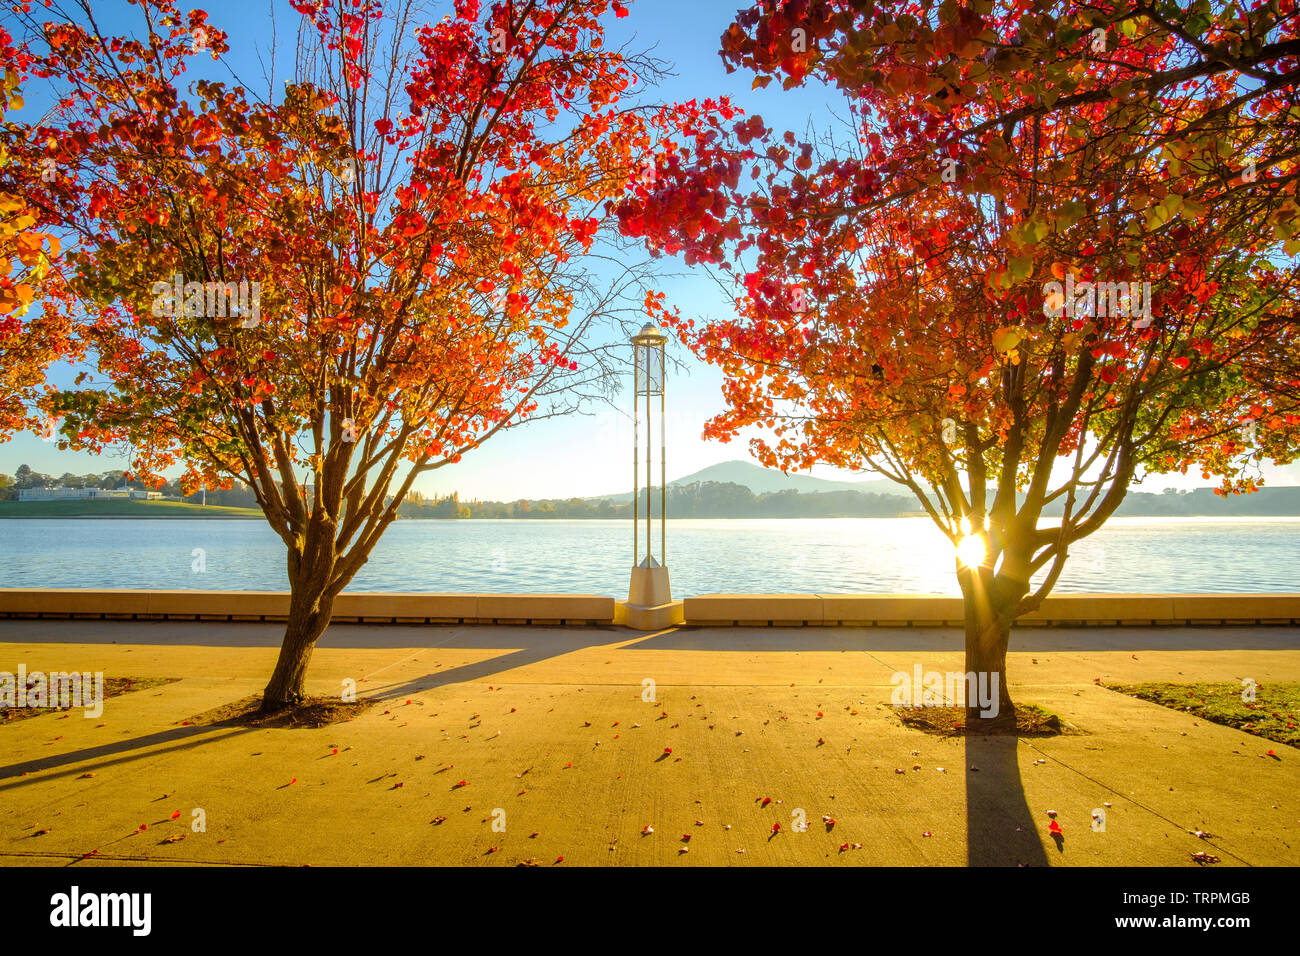 Autumn trees with red leaves by Lake Burley Griffin, Canberra, ACT Stock Photo